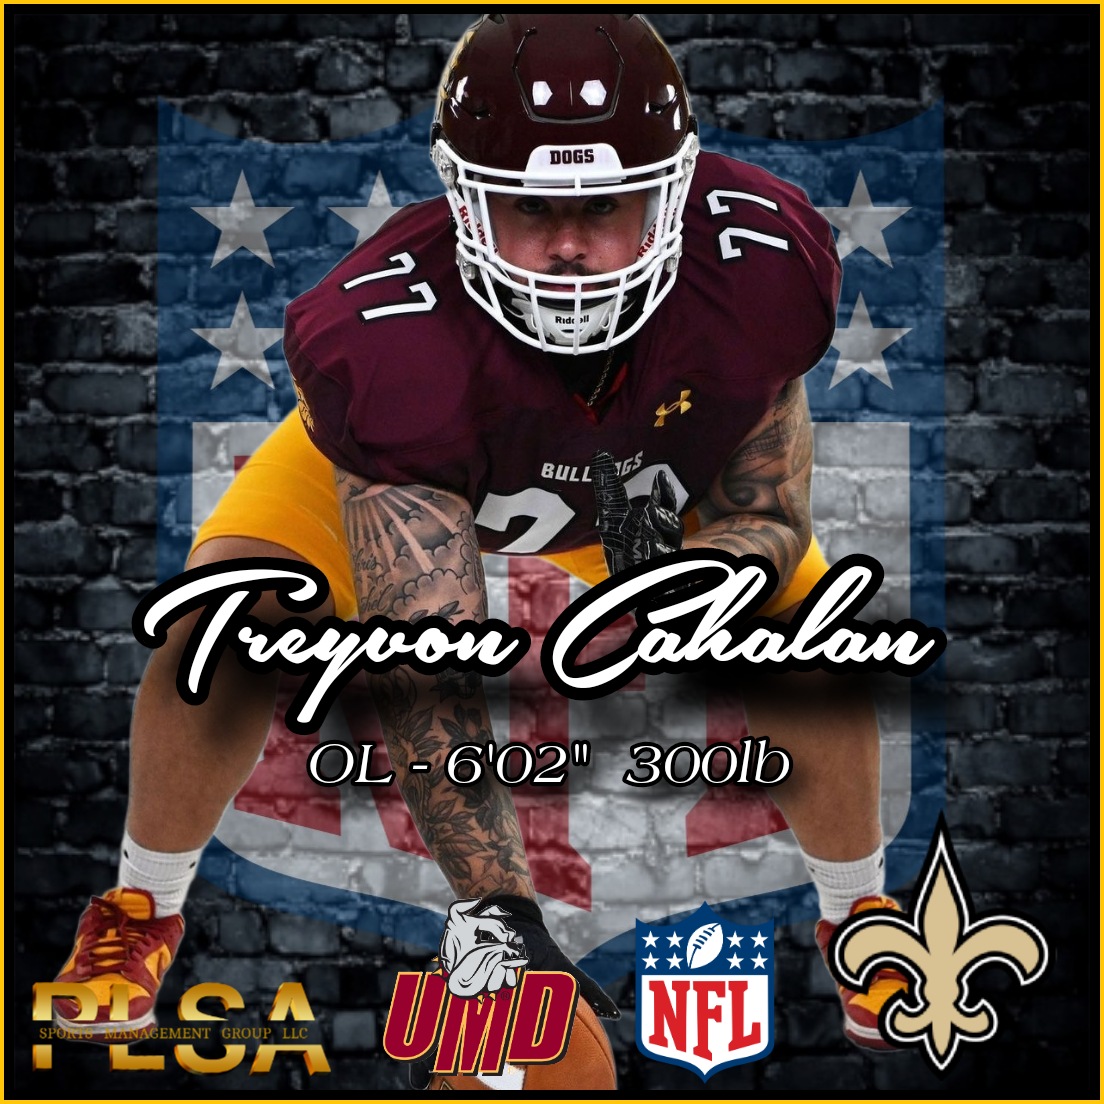 Congratulations to @ProLevelAgents client Treyvon Cahalan @CahalanTrey for receiving a Rookie Mini Camp invitation from @Saints Treyvon is a 6'02' & 300lb OL who played collegiately at @TheDunkirkies